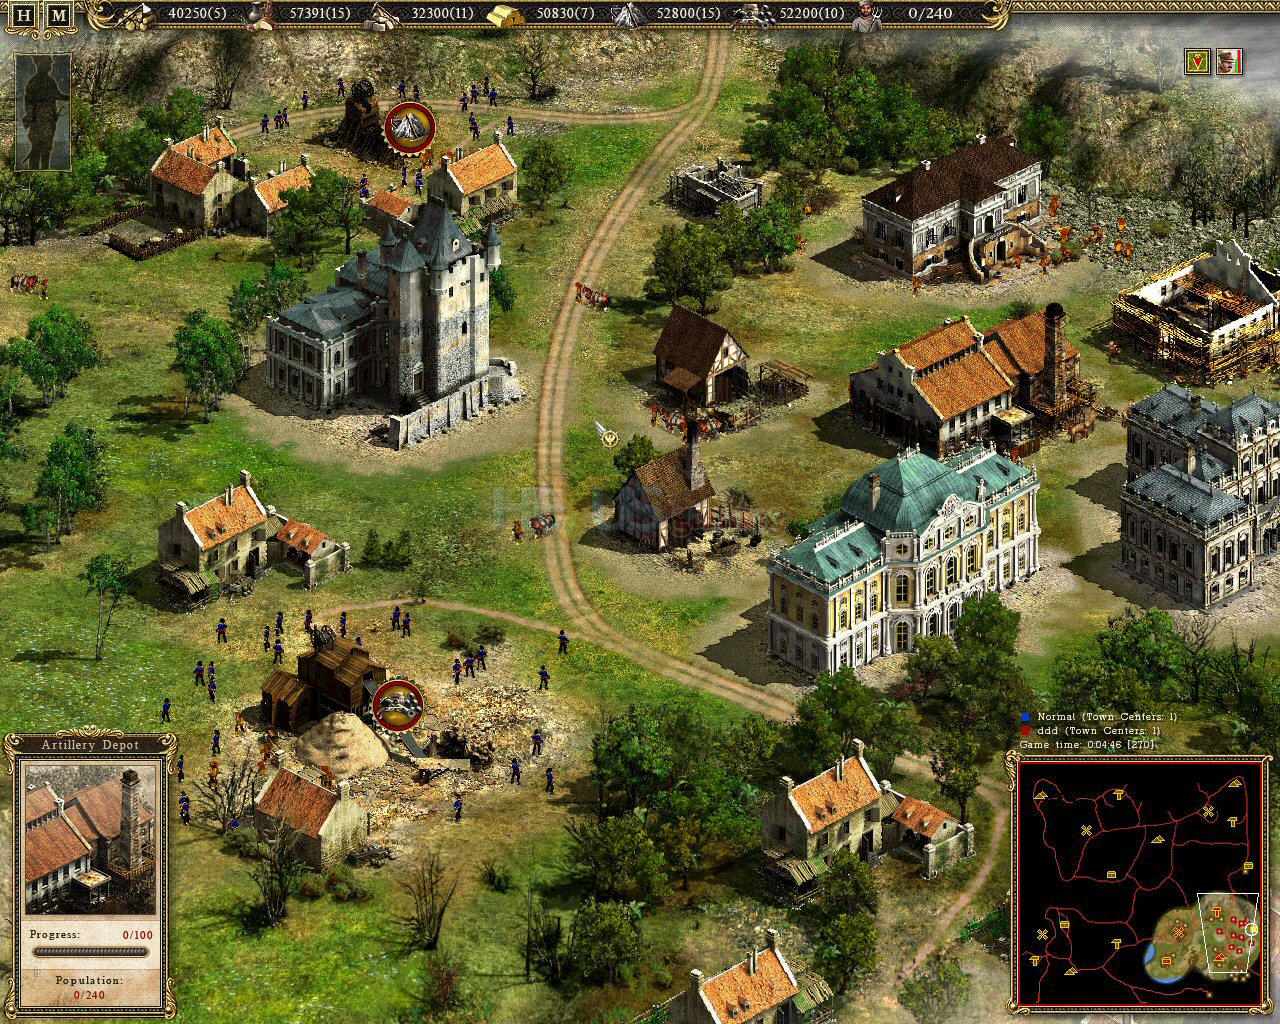 Download Game Cossack 2 Full Free